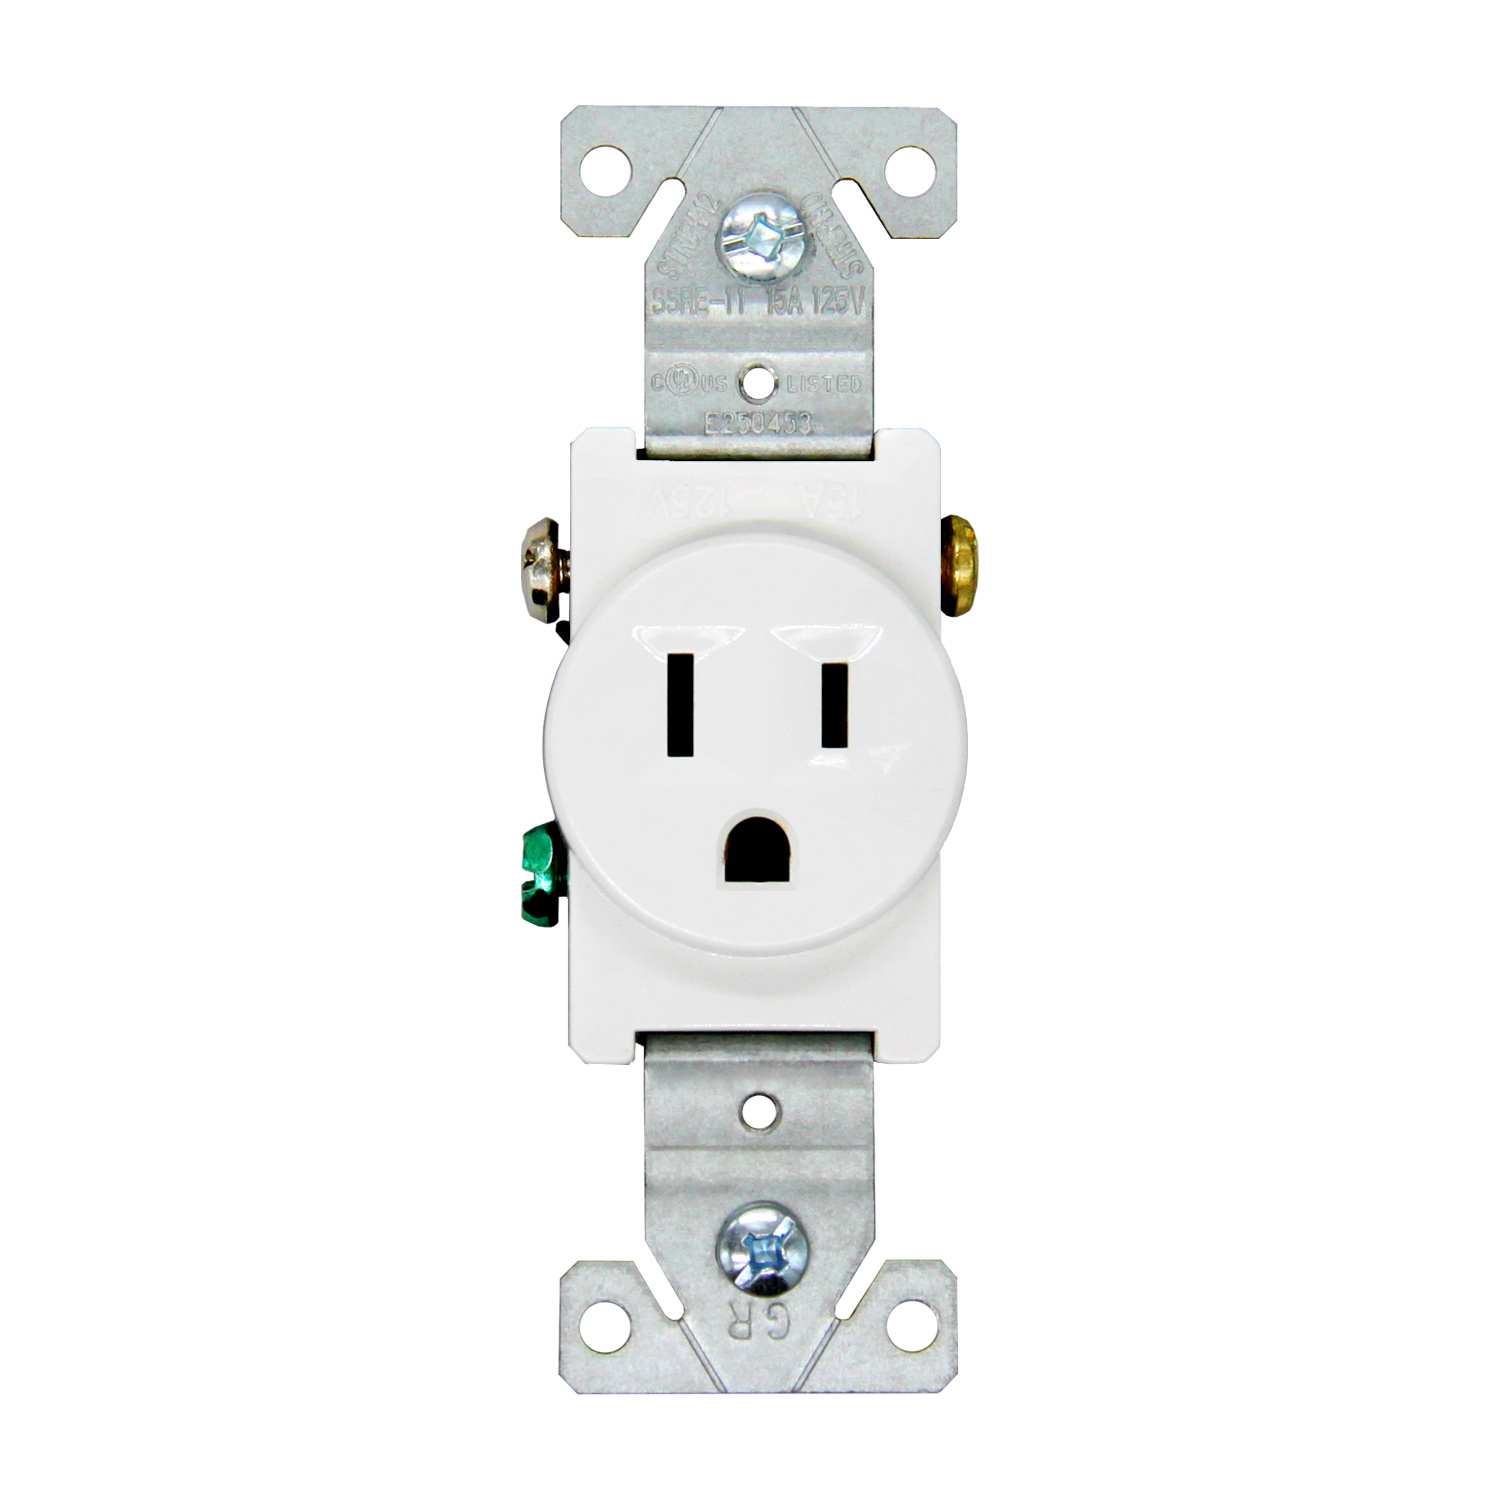 UL Listed Grounding Screw 15 Amp Single Receptacle Outlet, 125-Volt NEMA 5-15R, SSRE-11 Featured Image